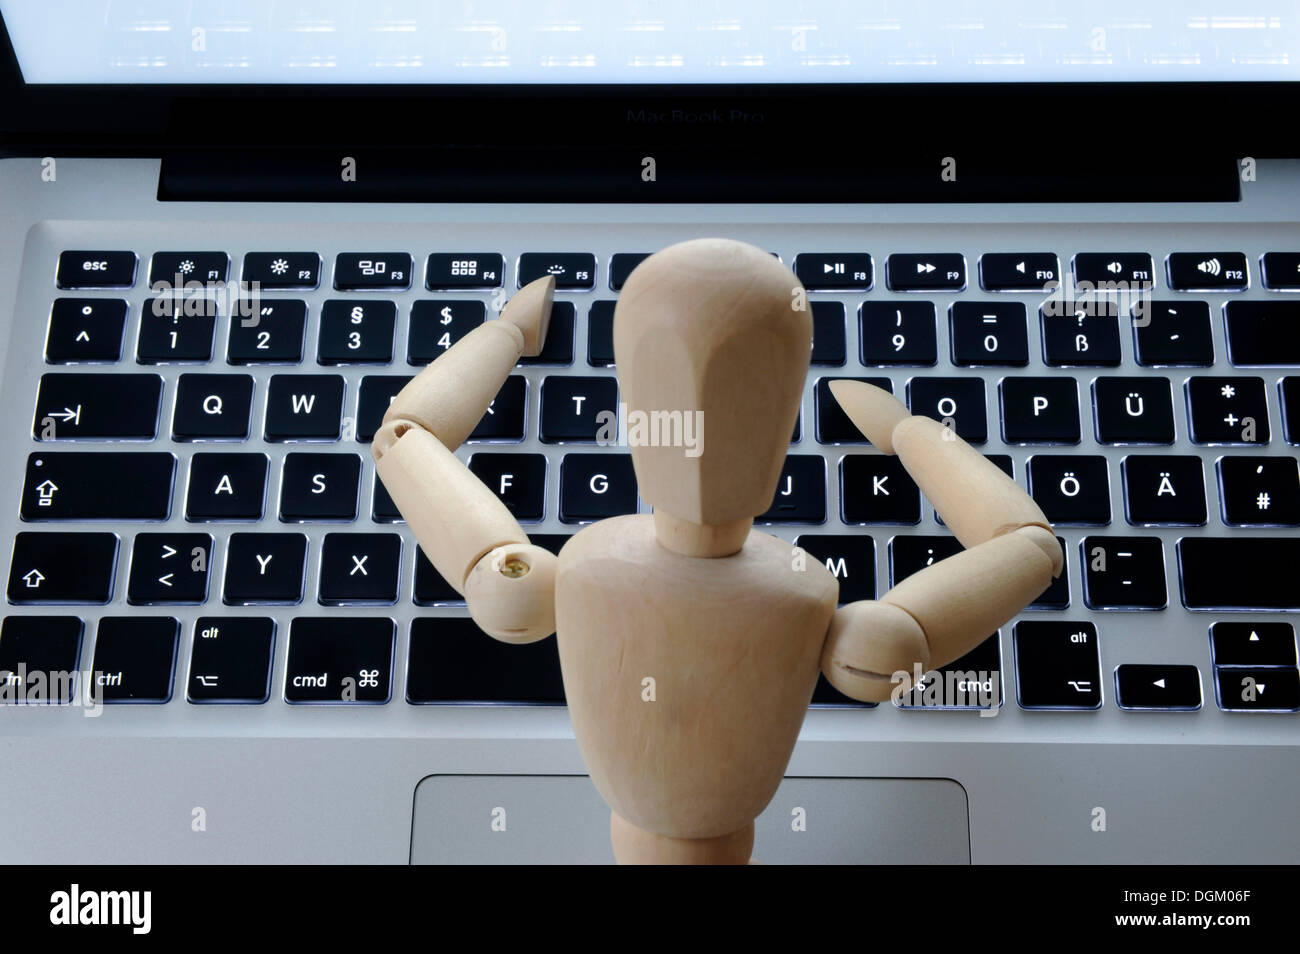 Mannequin at the keyboard, symbolic image for human beings and computers Stock Photo